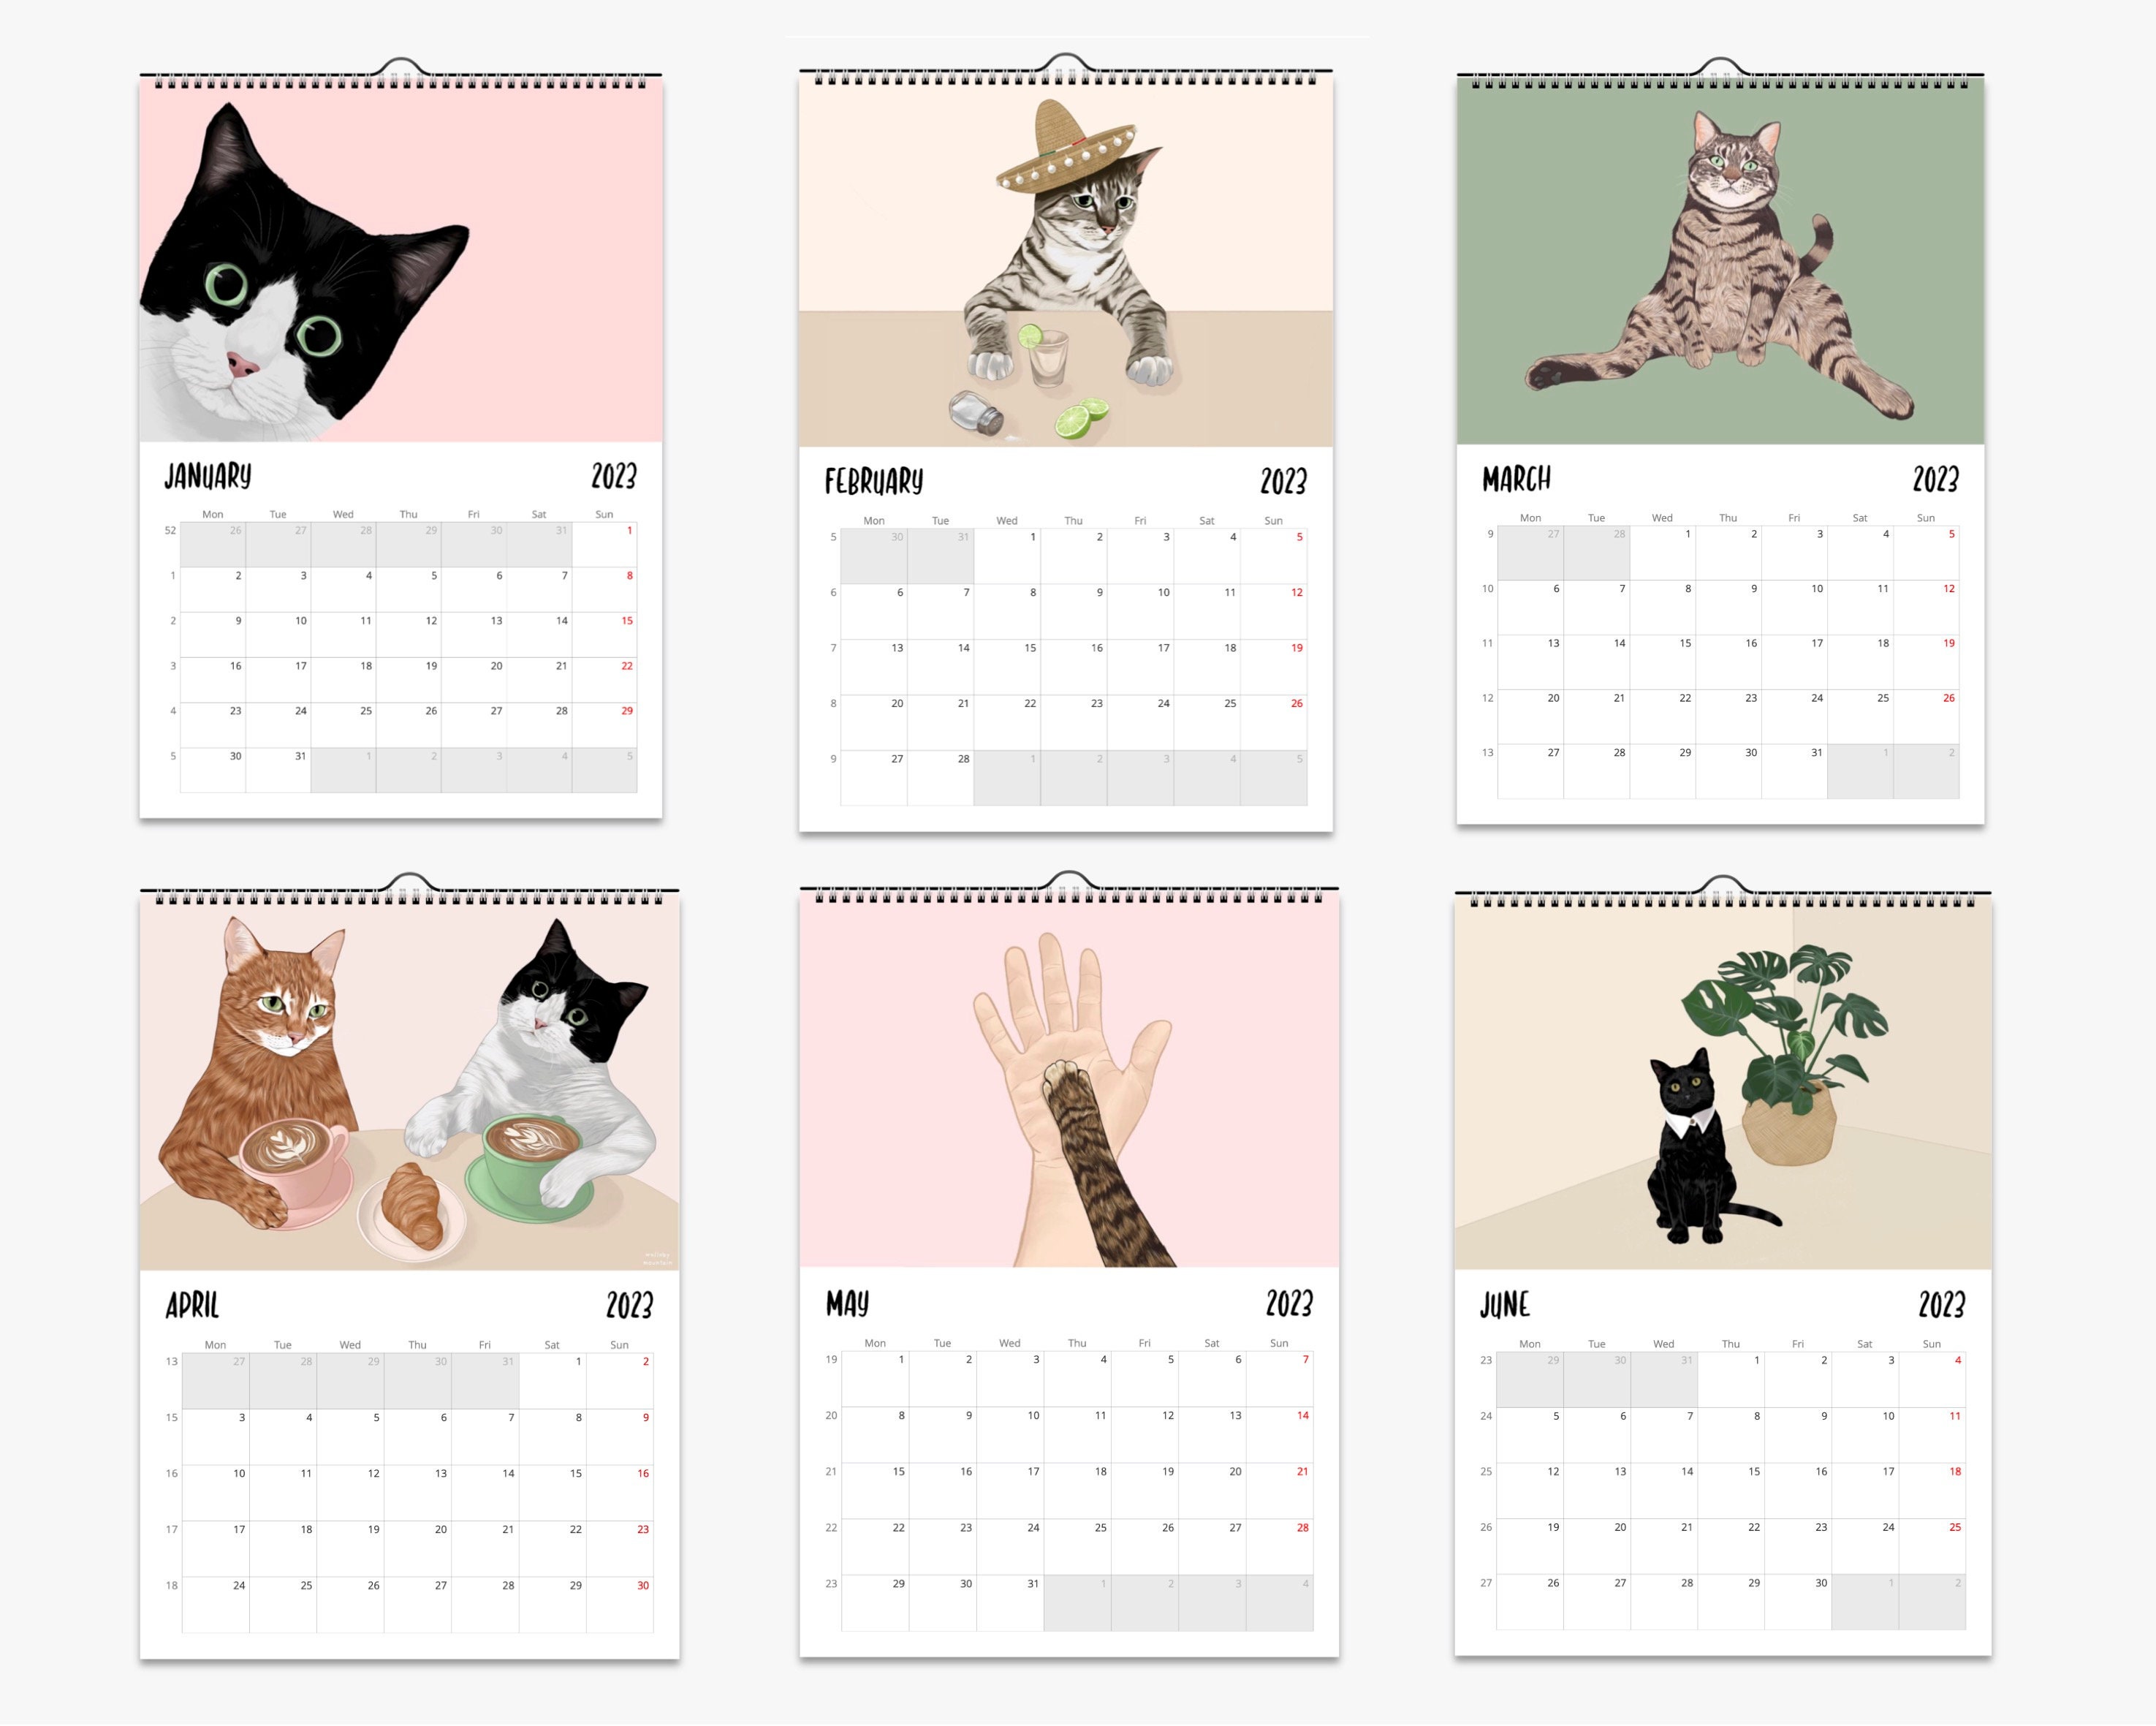 Chats Calendrier mural 2024 cm 31x33